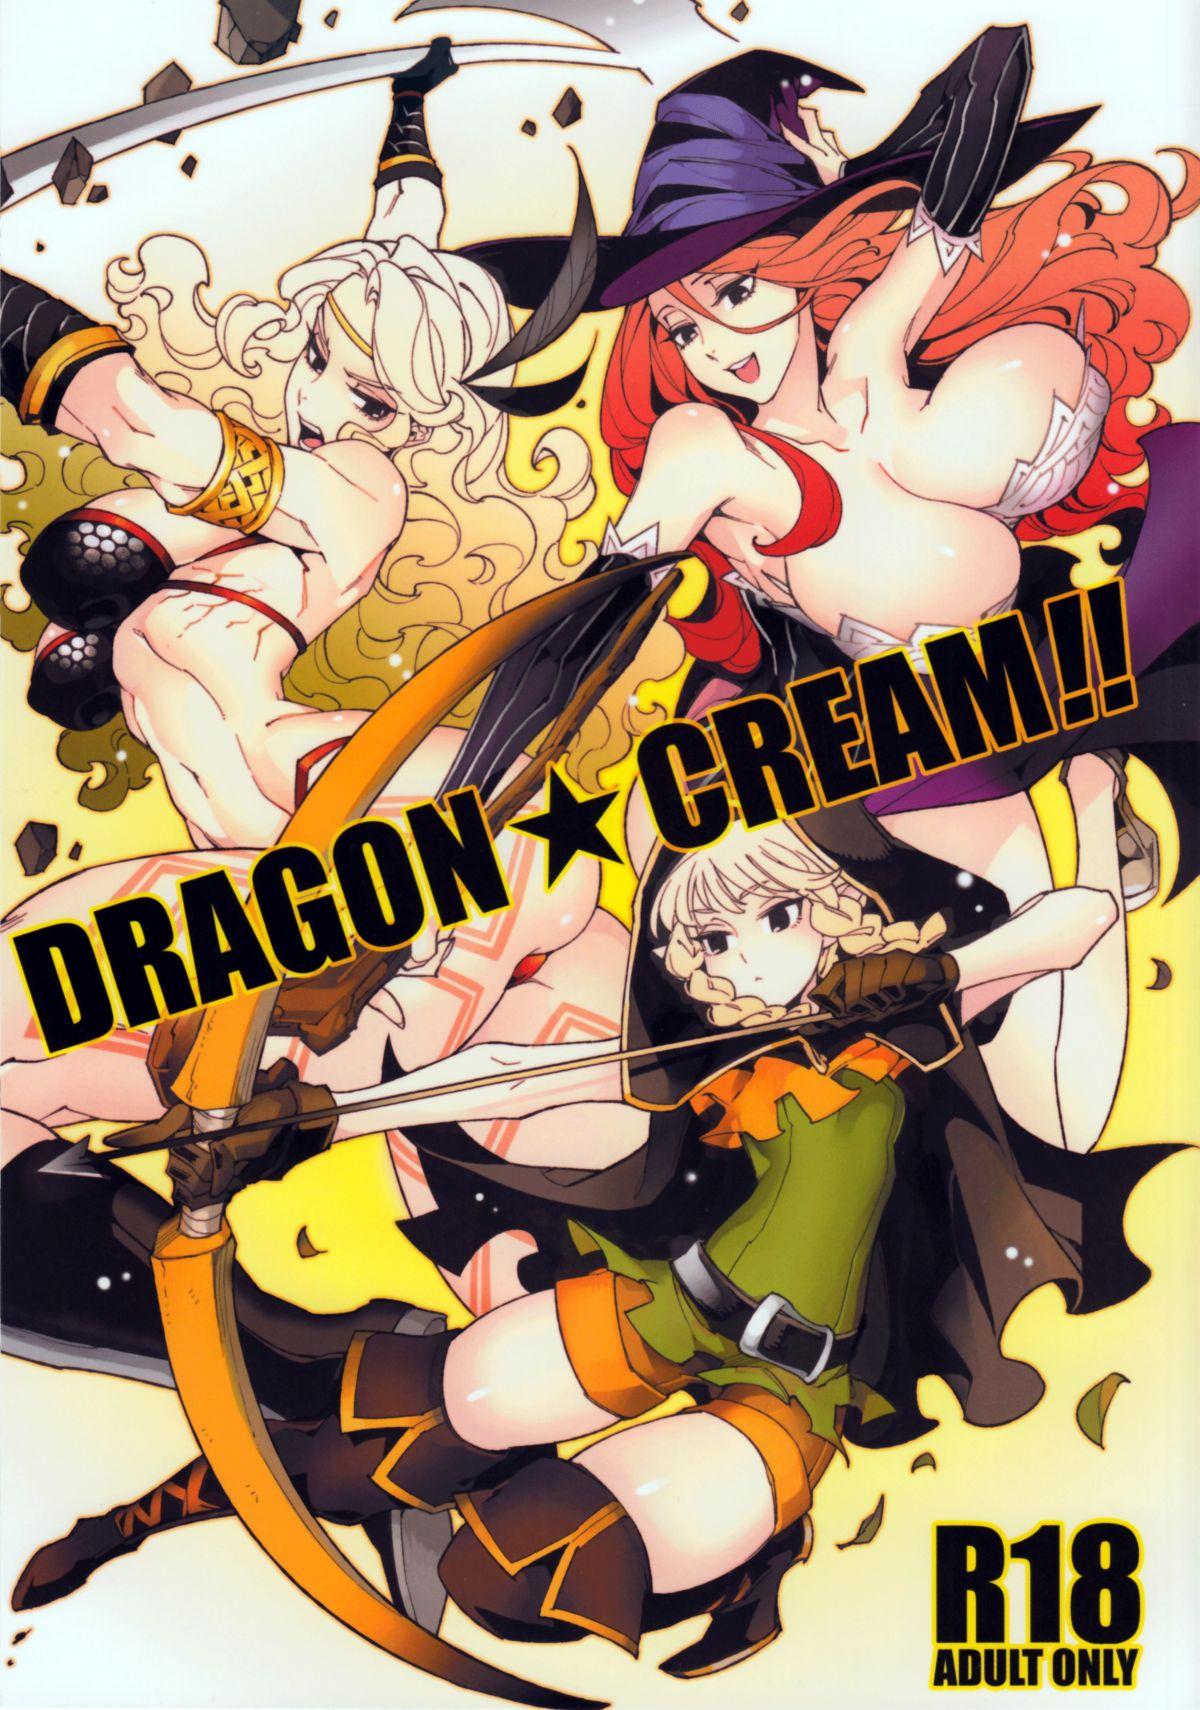 Hot Whores Dragon Cream!! - Dragons crown Real - Page 1